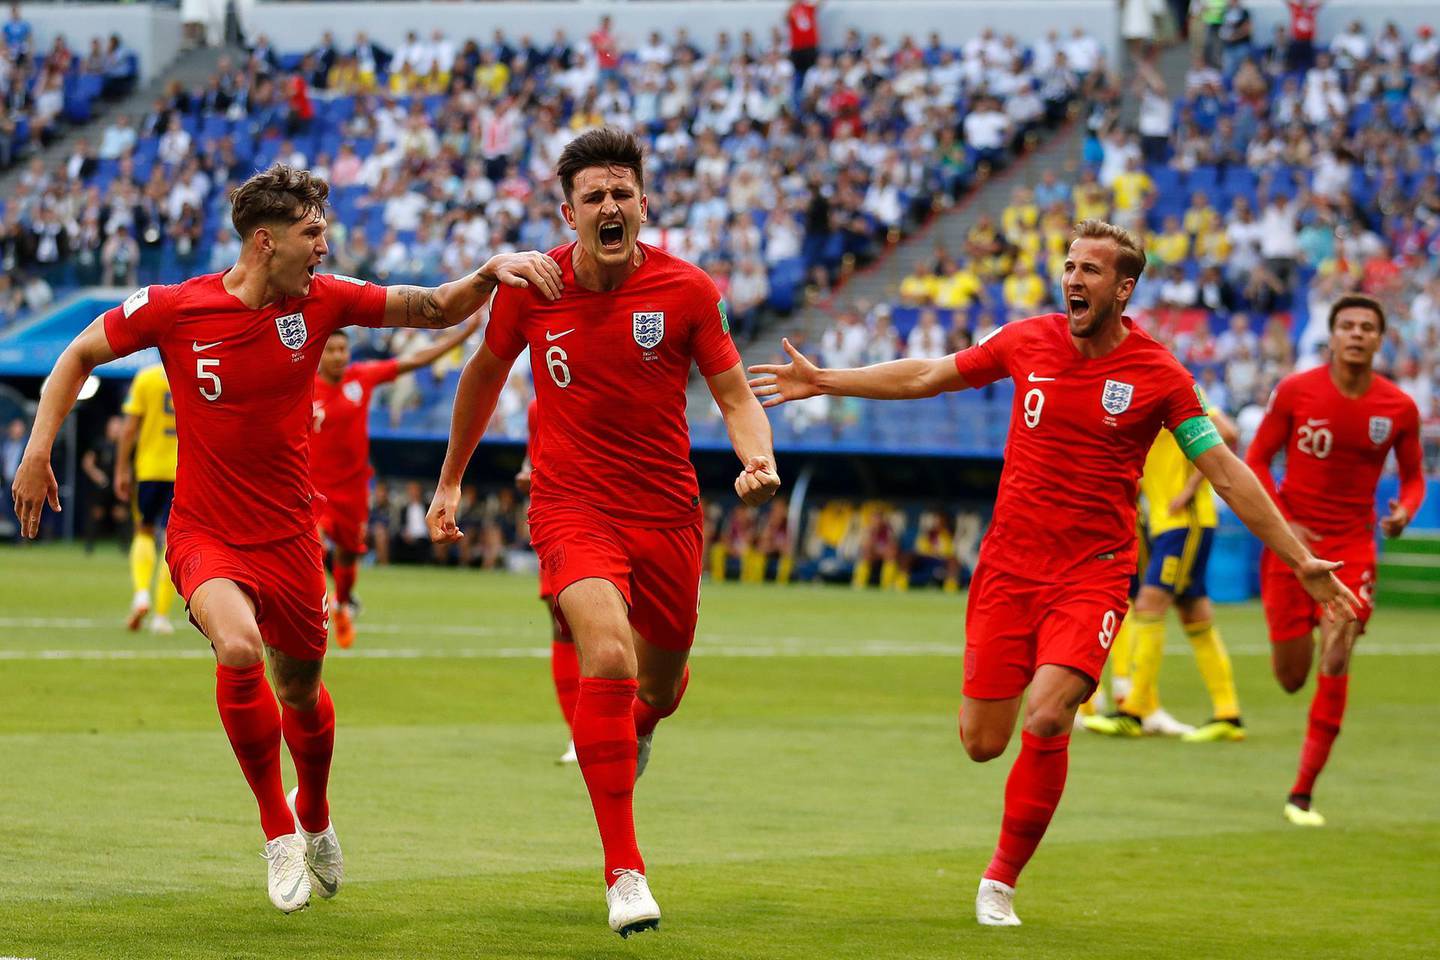 England's Harry Maguire, center, celebrates with his team mates after scoring his side opening goal during the quarterfinal match between Sweden and England at the 2018 soccer World Cup in the Samara Arena, in Samara, Russia, Saturday, July 7, 2018. (AP Photo/Francisco Seco)